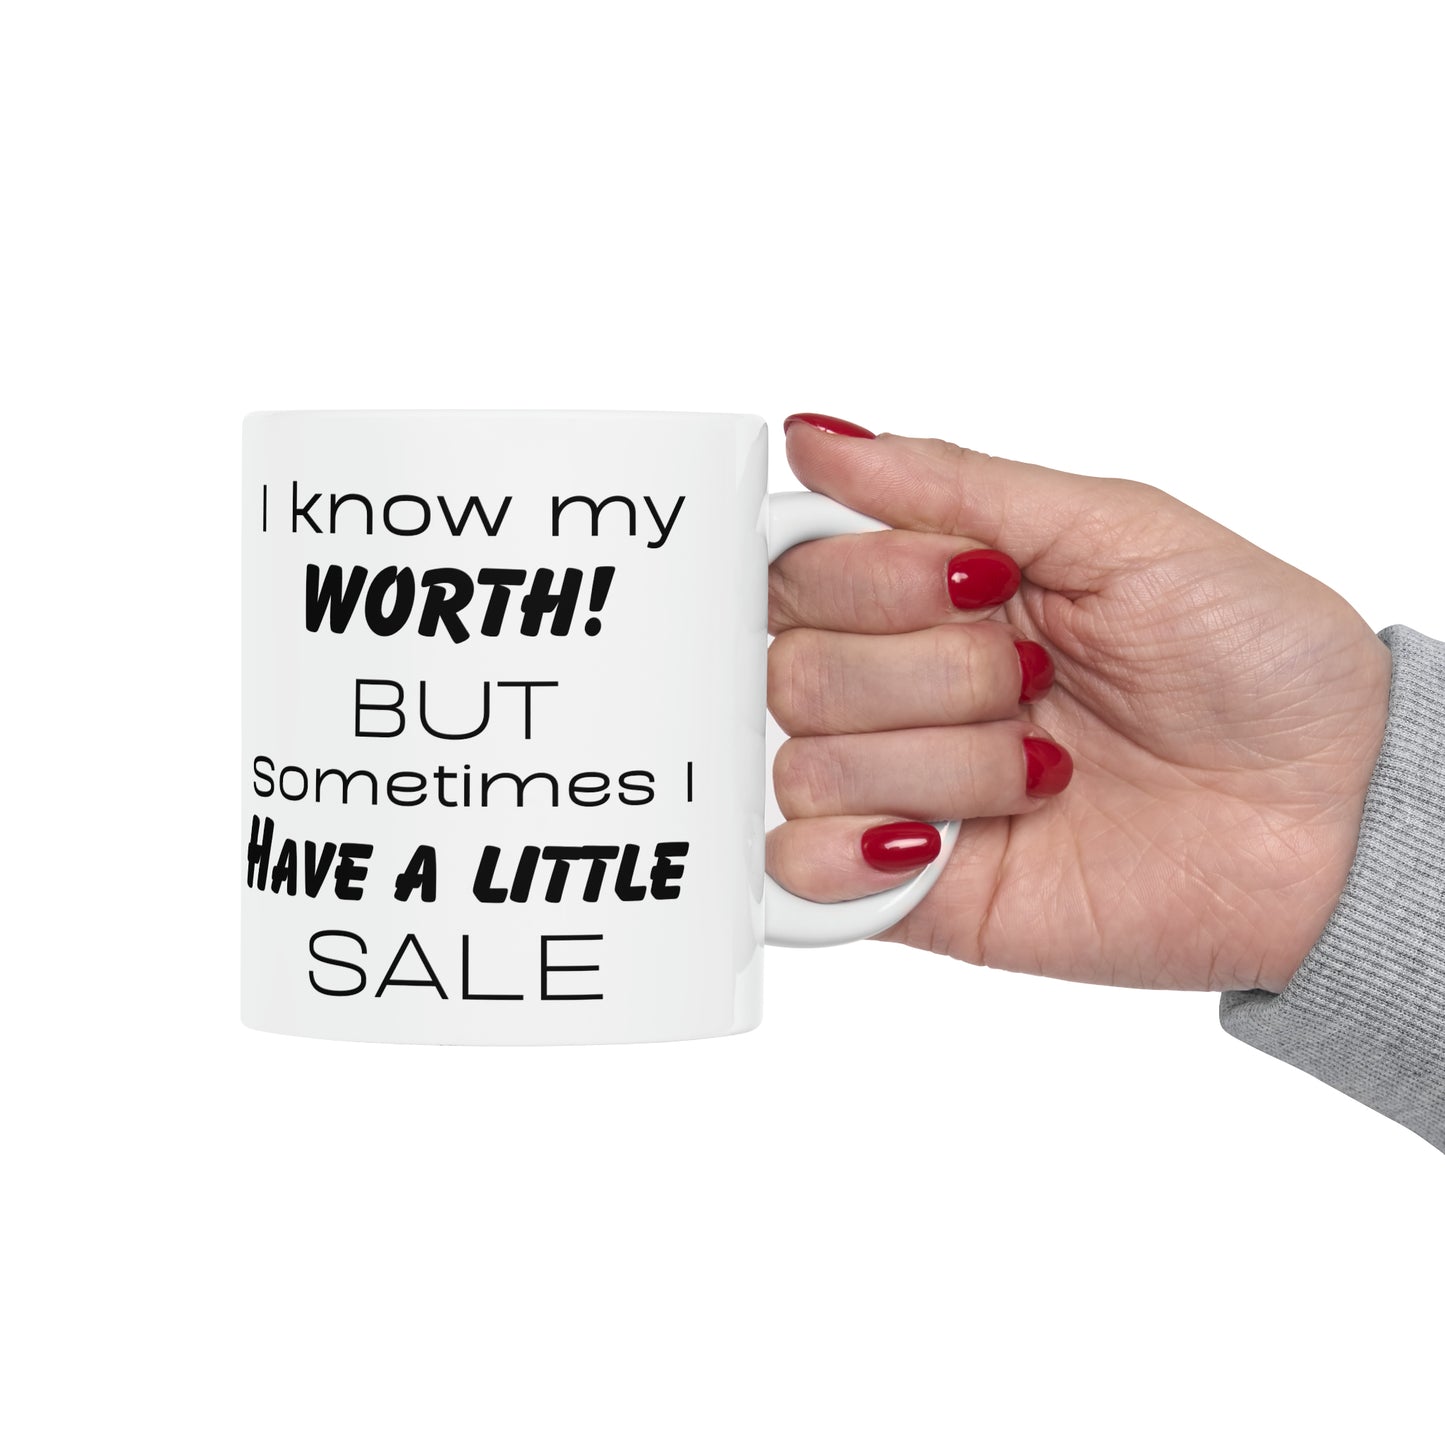 I know my worth, but sometimes I have a little sale! Ceramic Coffee Cups, 11oz, 15oz